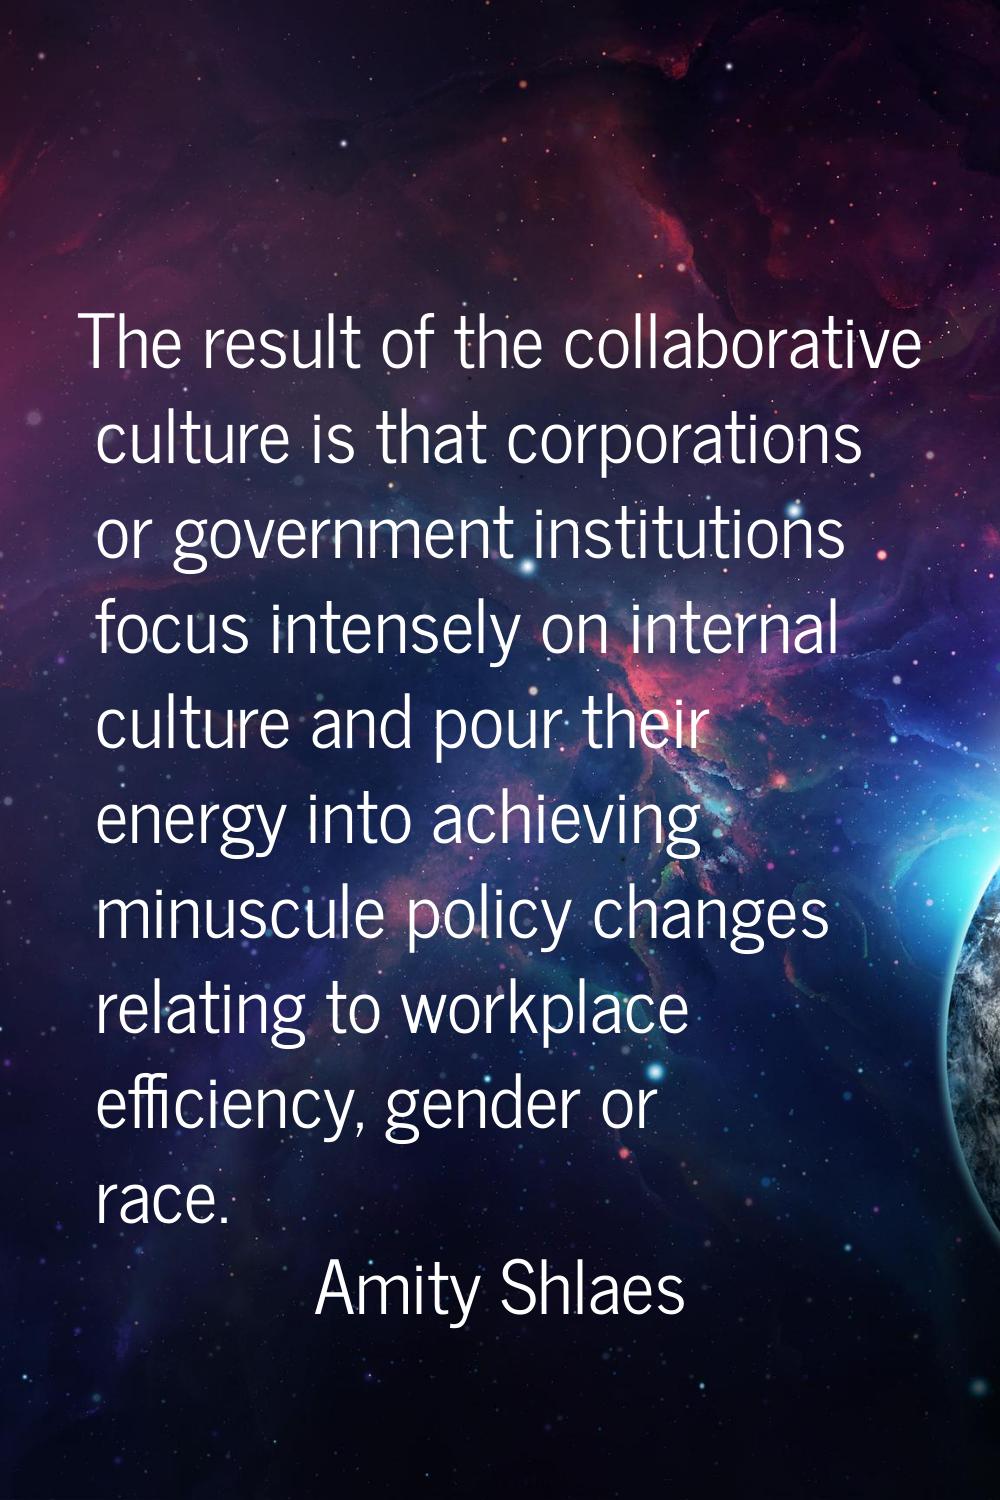 The result of the collaborative culture is that corporations or government institutions focus inten